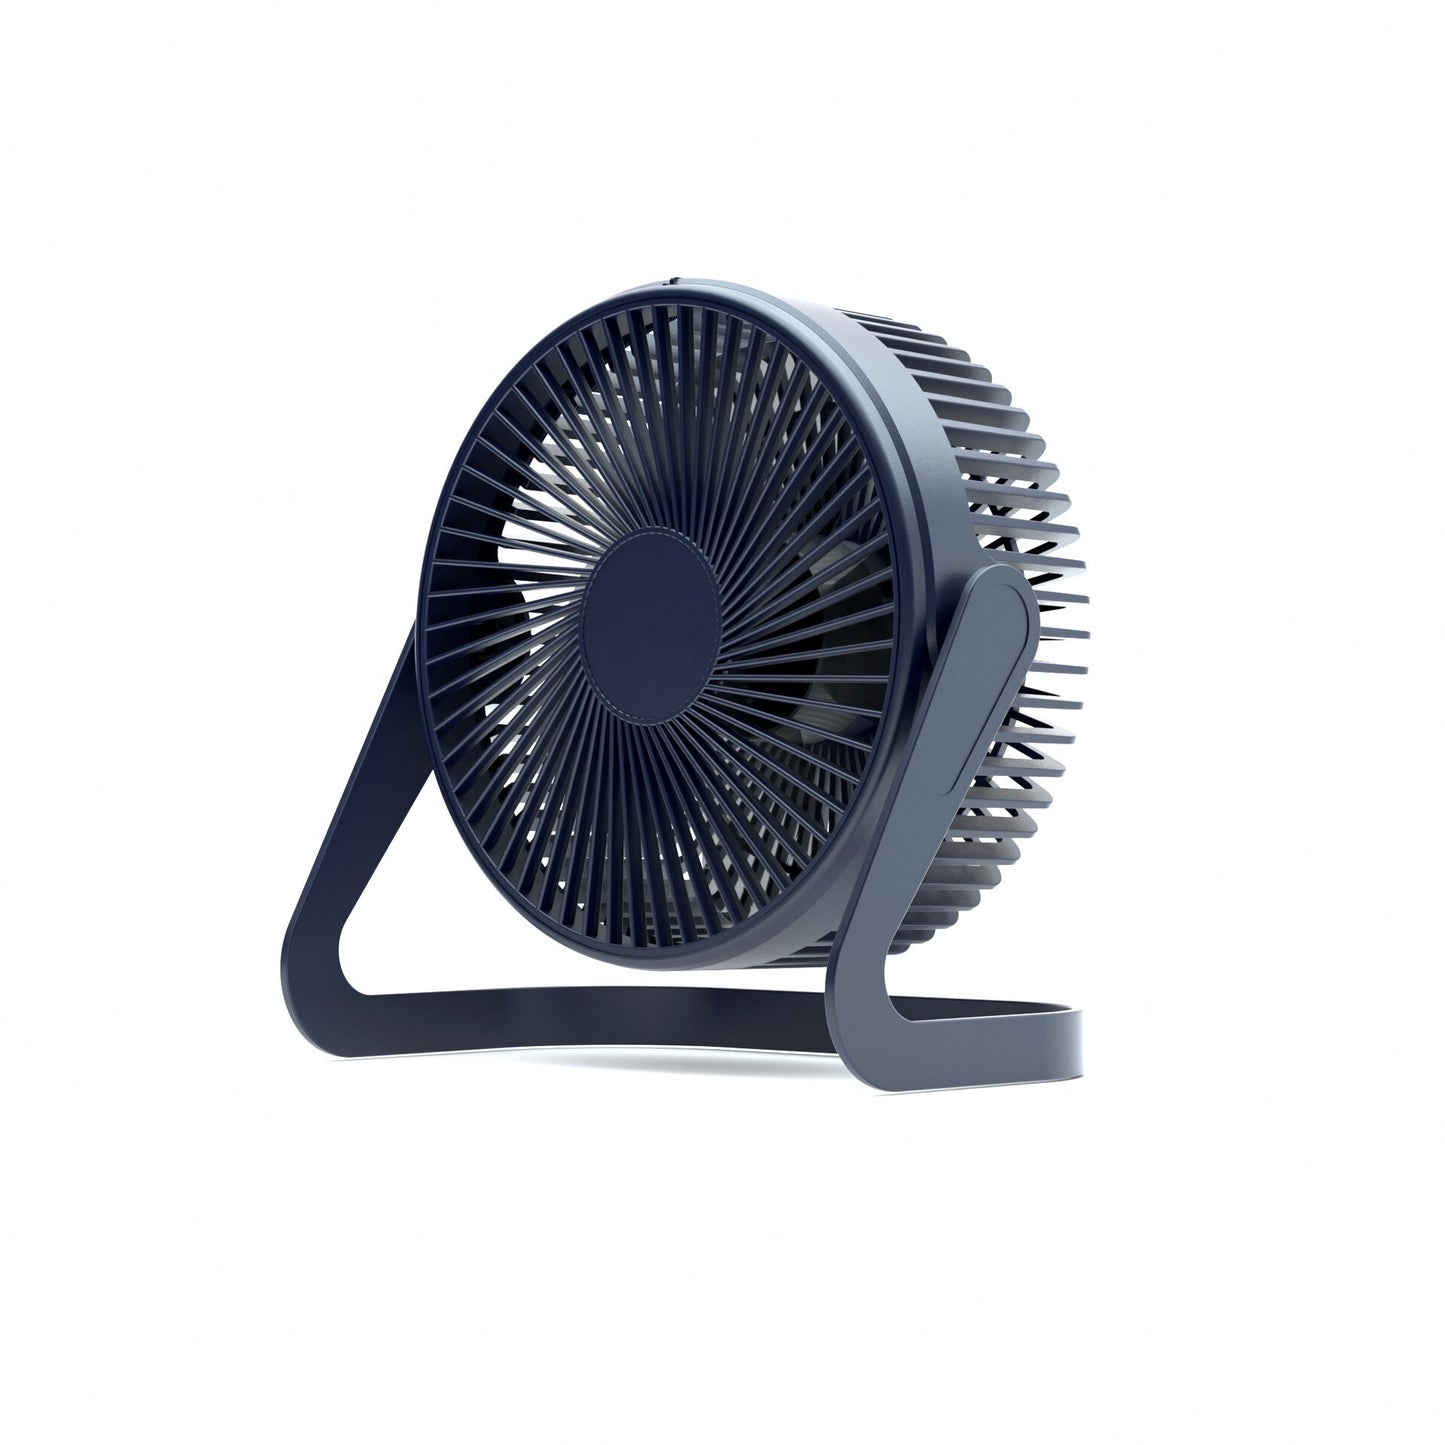 CoolBreeze 5-Inch USB Desktop Fan: Portable, Adjustable, and Silent Air Cooling Solution for Home and Office